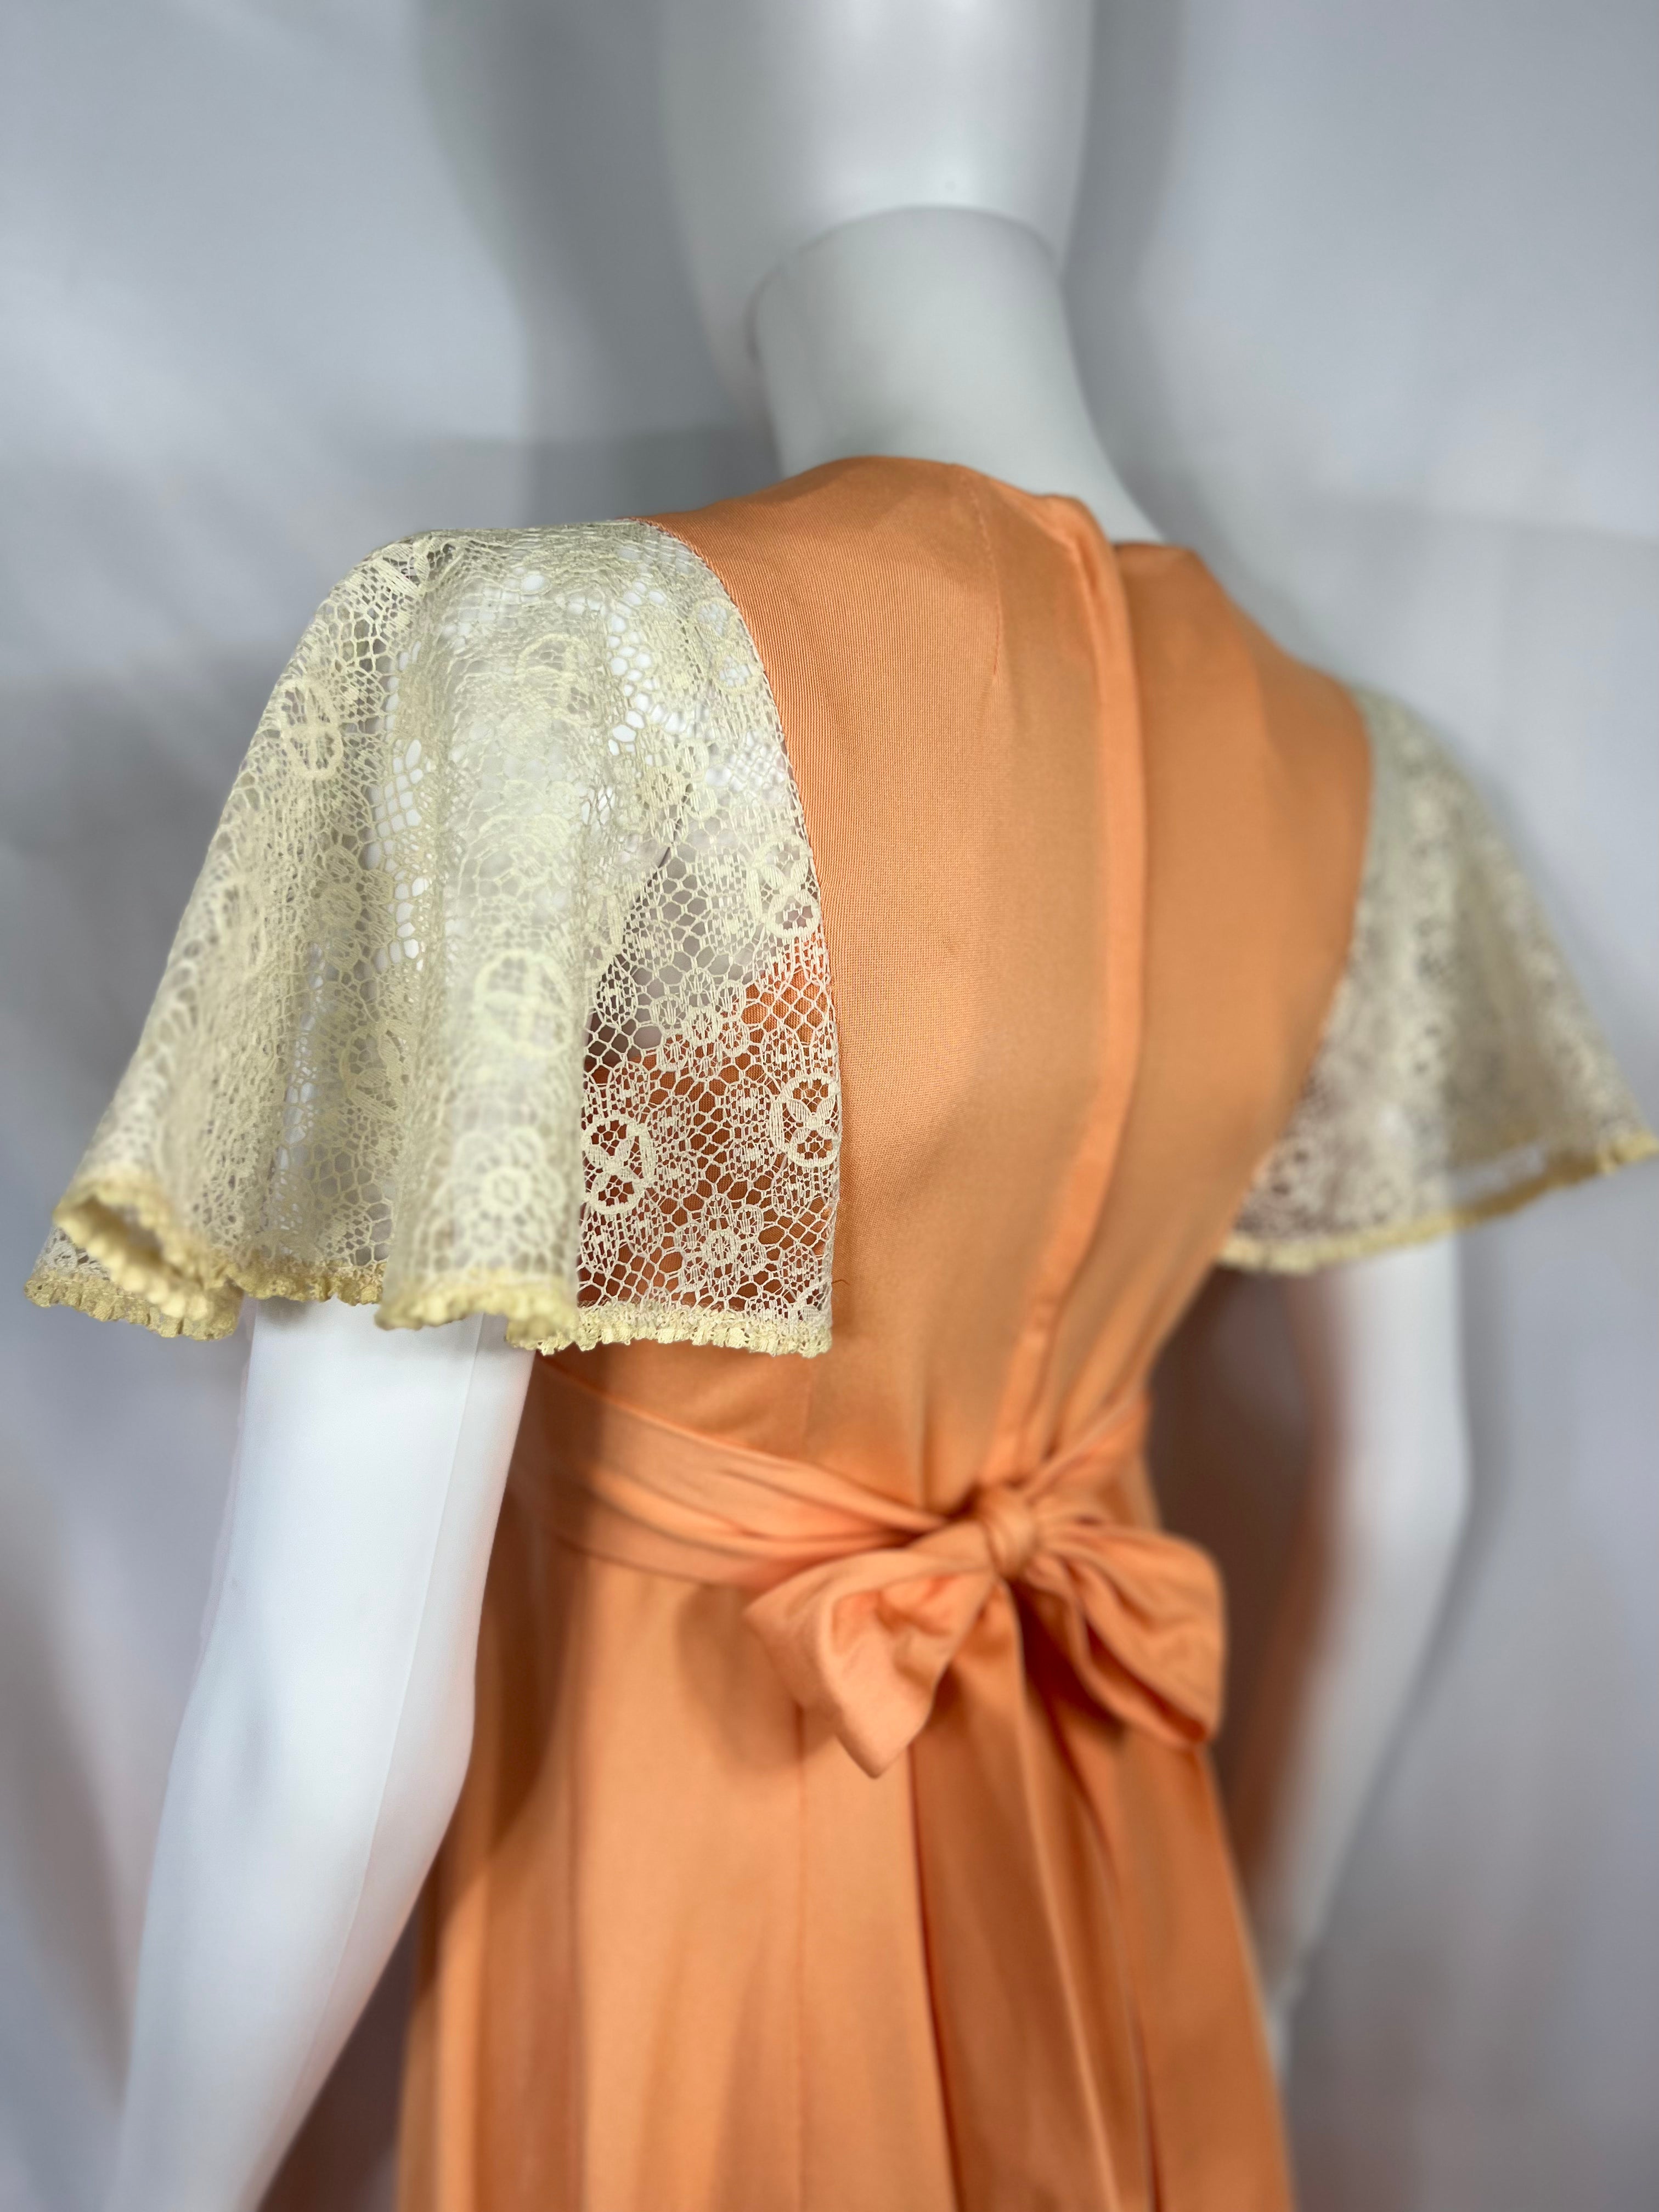 1970's Peach Dress w/ Doiley Lace Sleeves